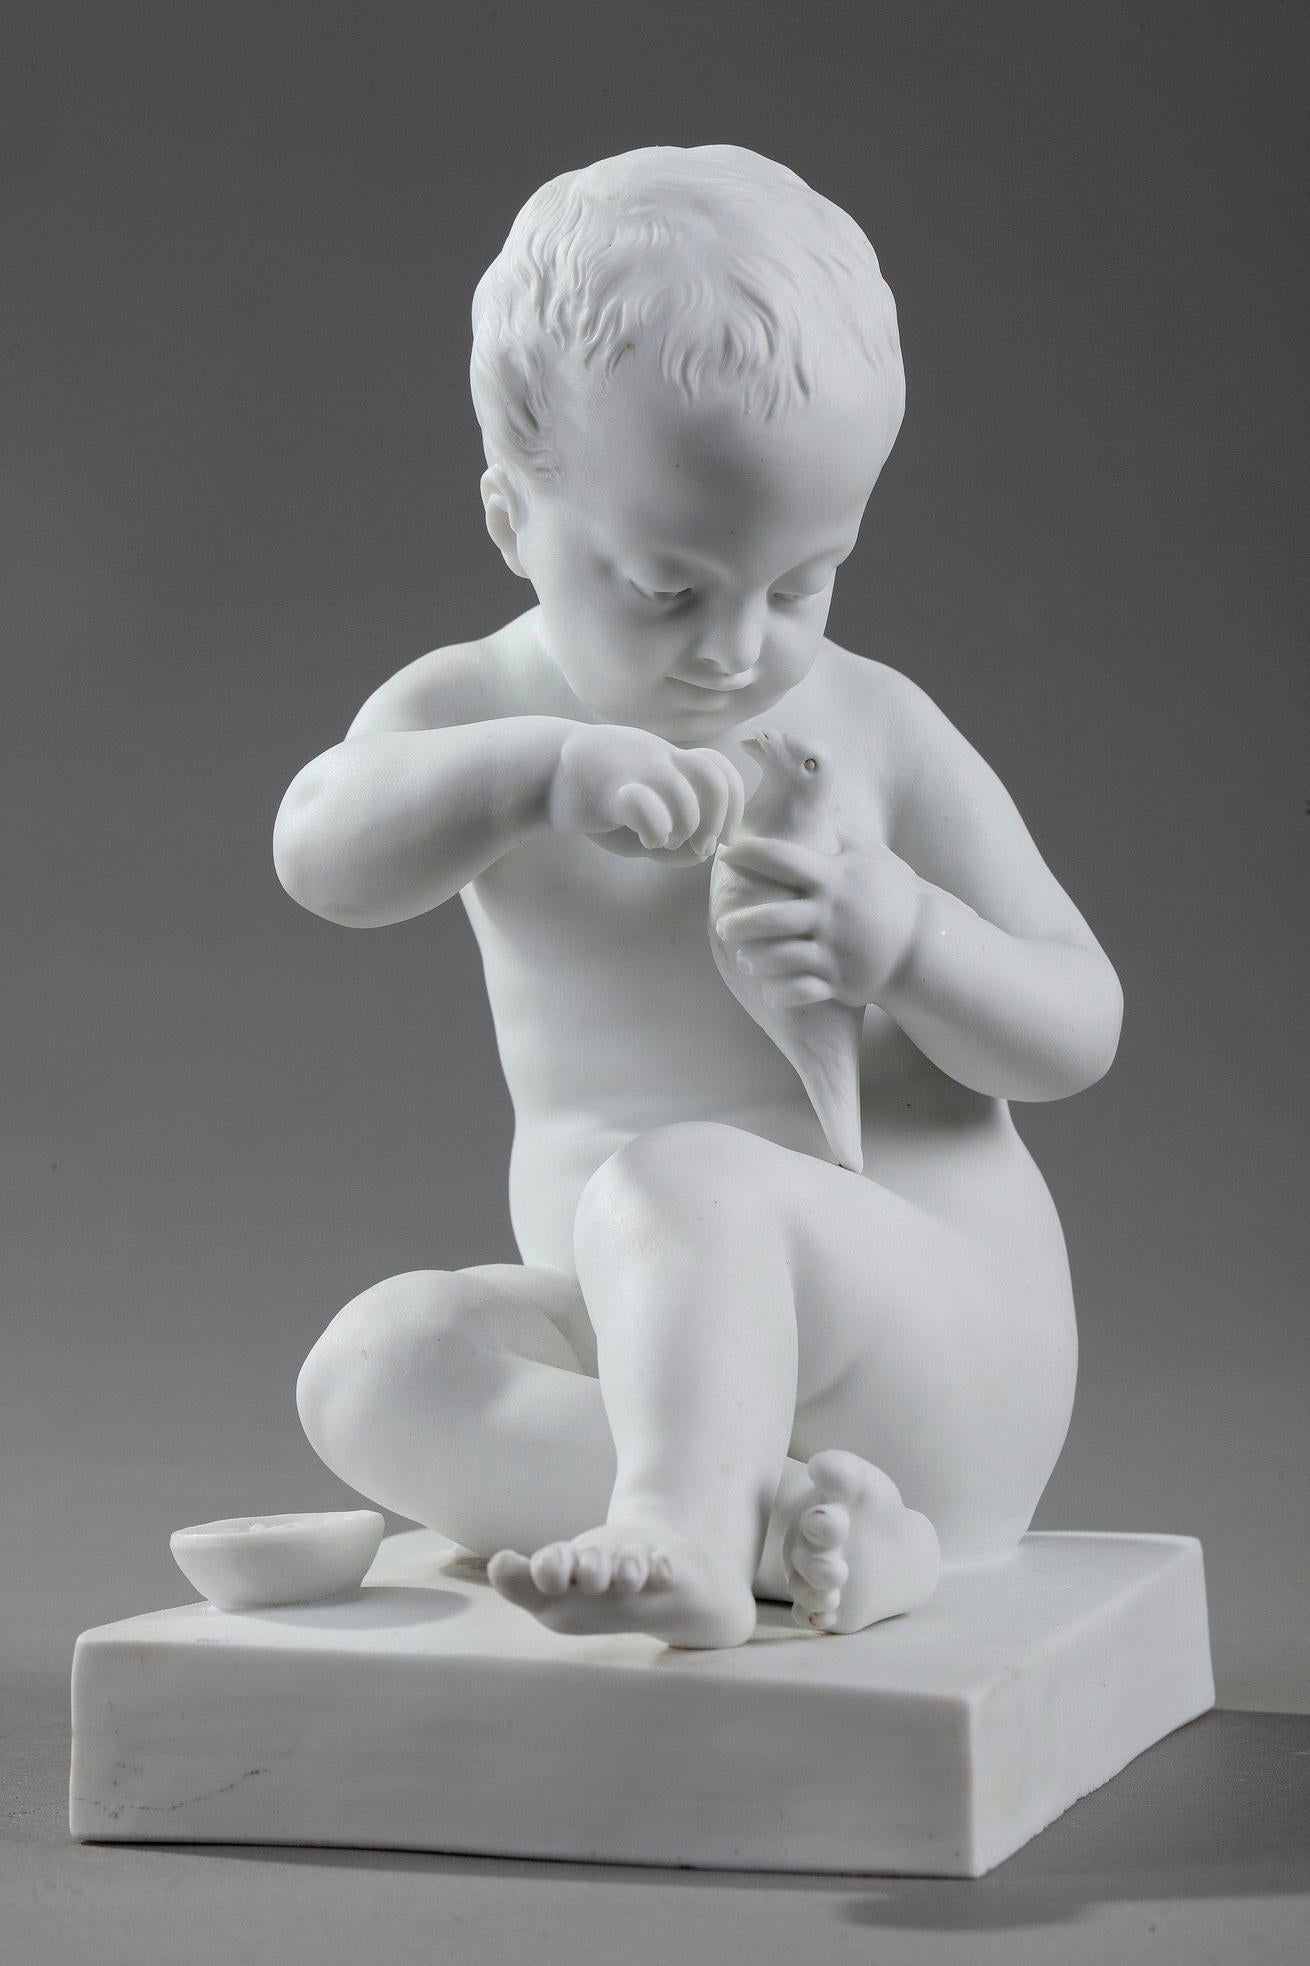 Two small bisque figurines child with bird cage and girl with a bird and a shell after a 18th century model by Jean-Baptiste Pigalle (1714-1785). Child with Birdcage original marble (1749) was presented at the Salon of 1750 and is now housed in the